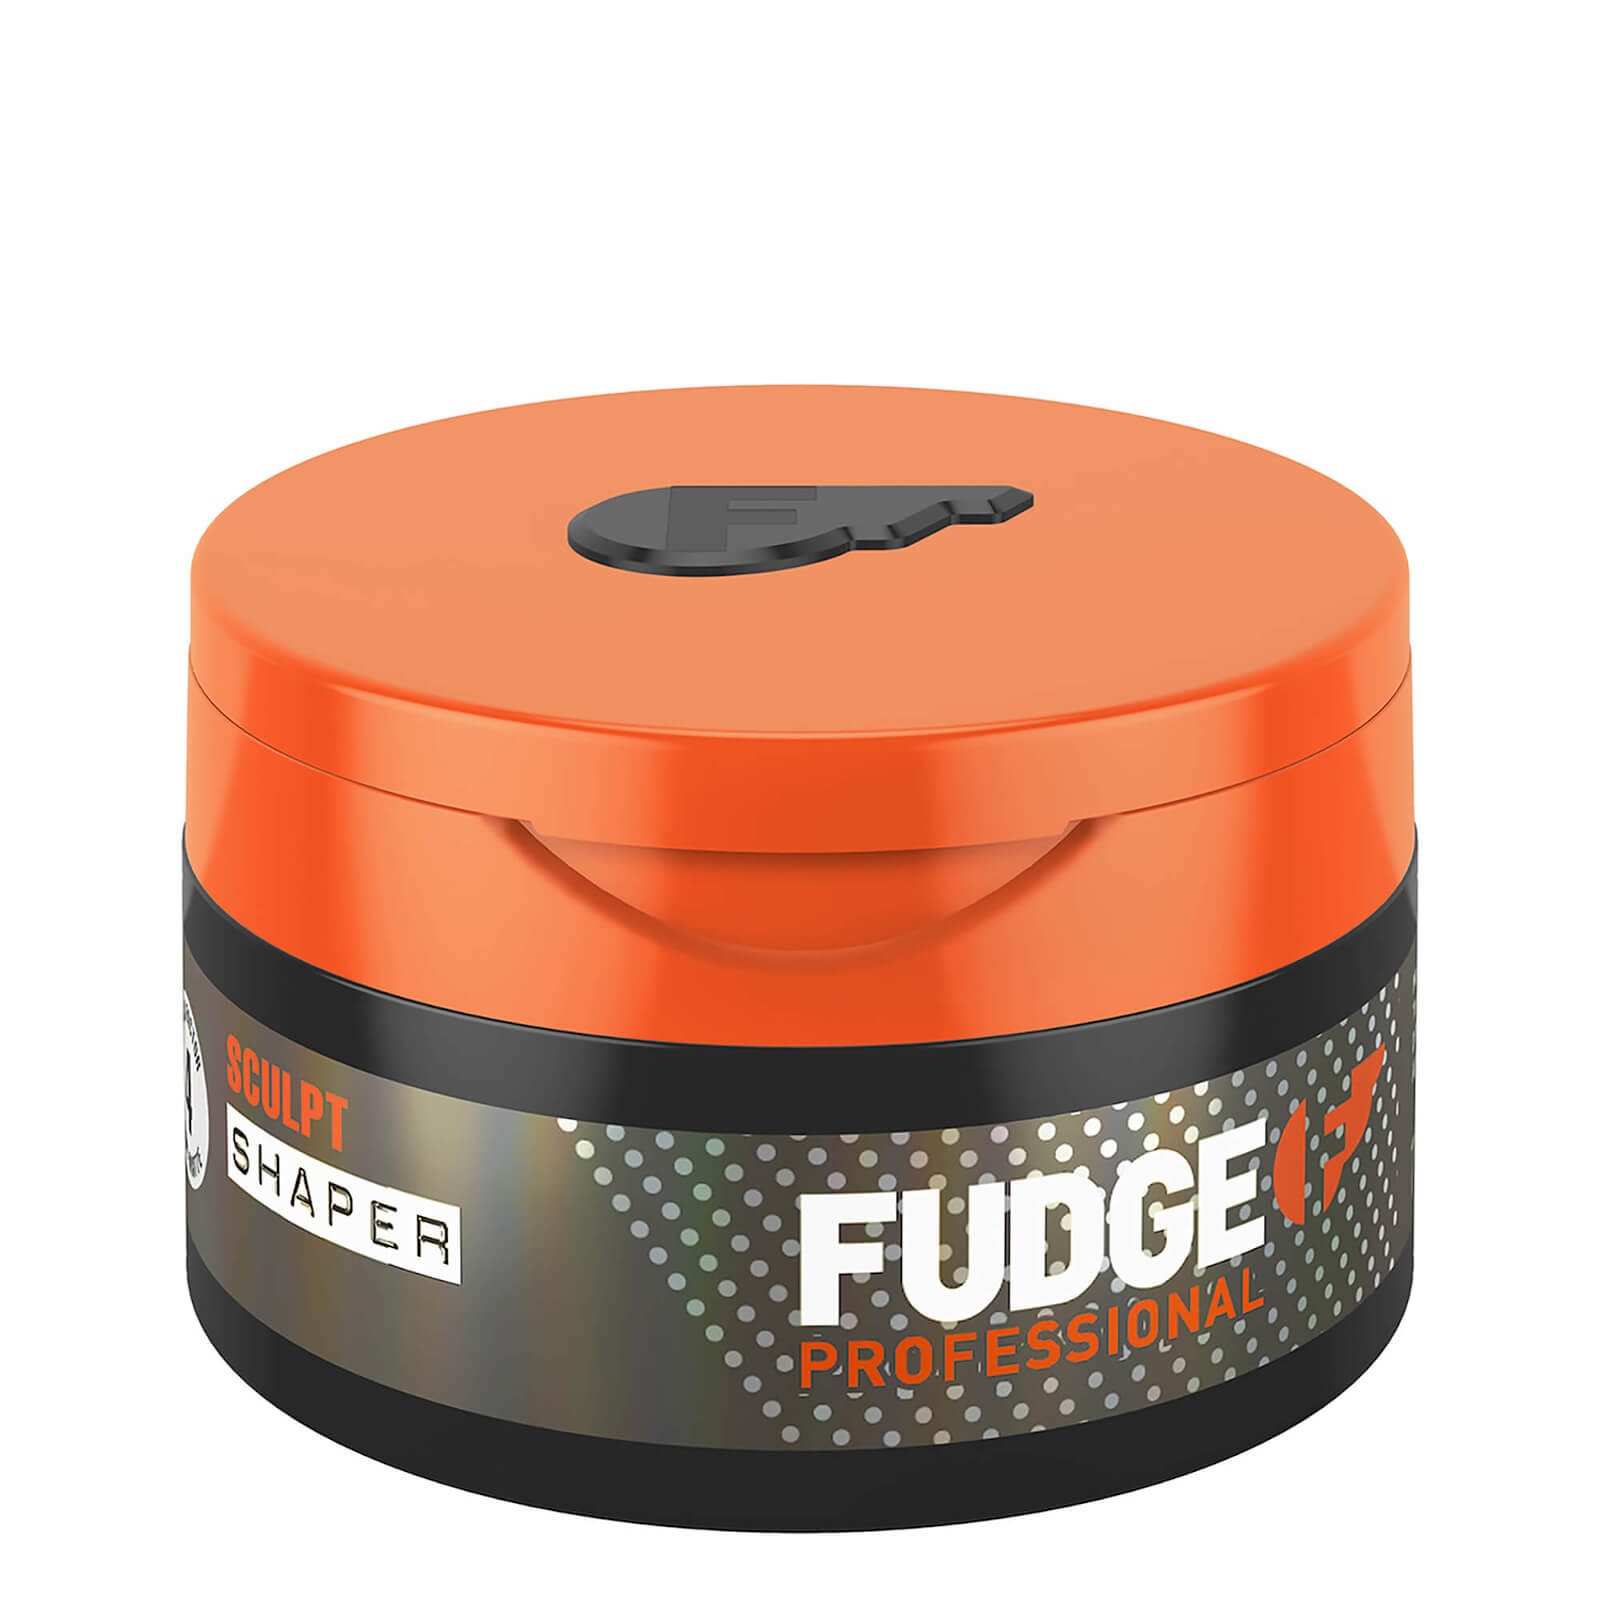 Fudge: 3 for 2 on Selected Products